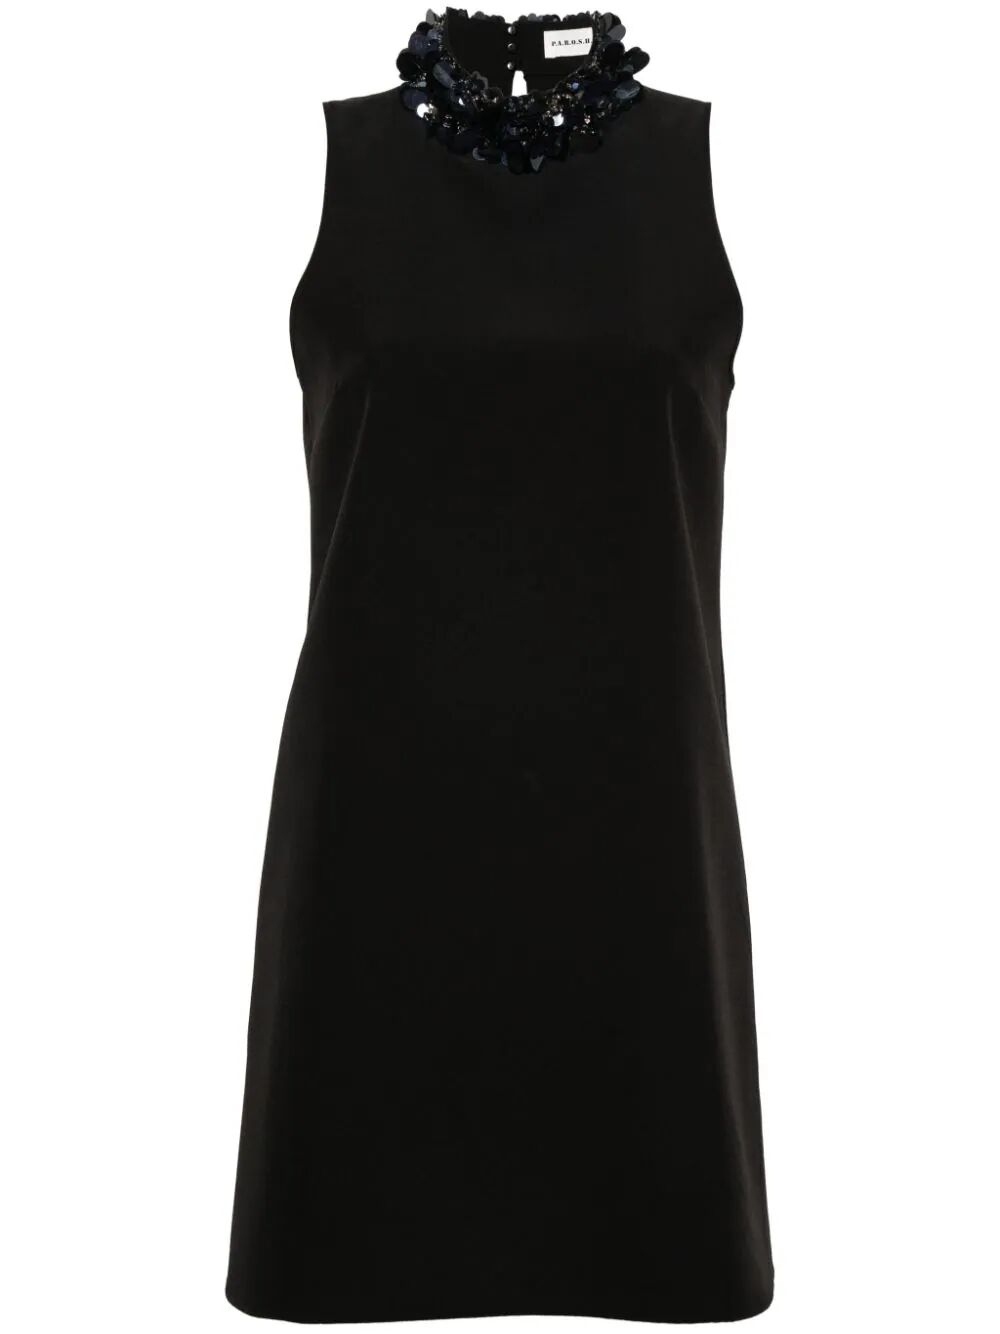 P.a.r.o.s.h Sleeveless High Neck Mini Dress With Paillettes In Black